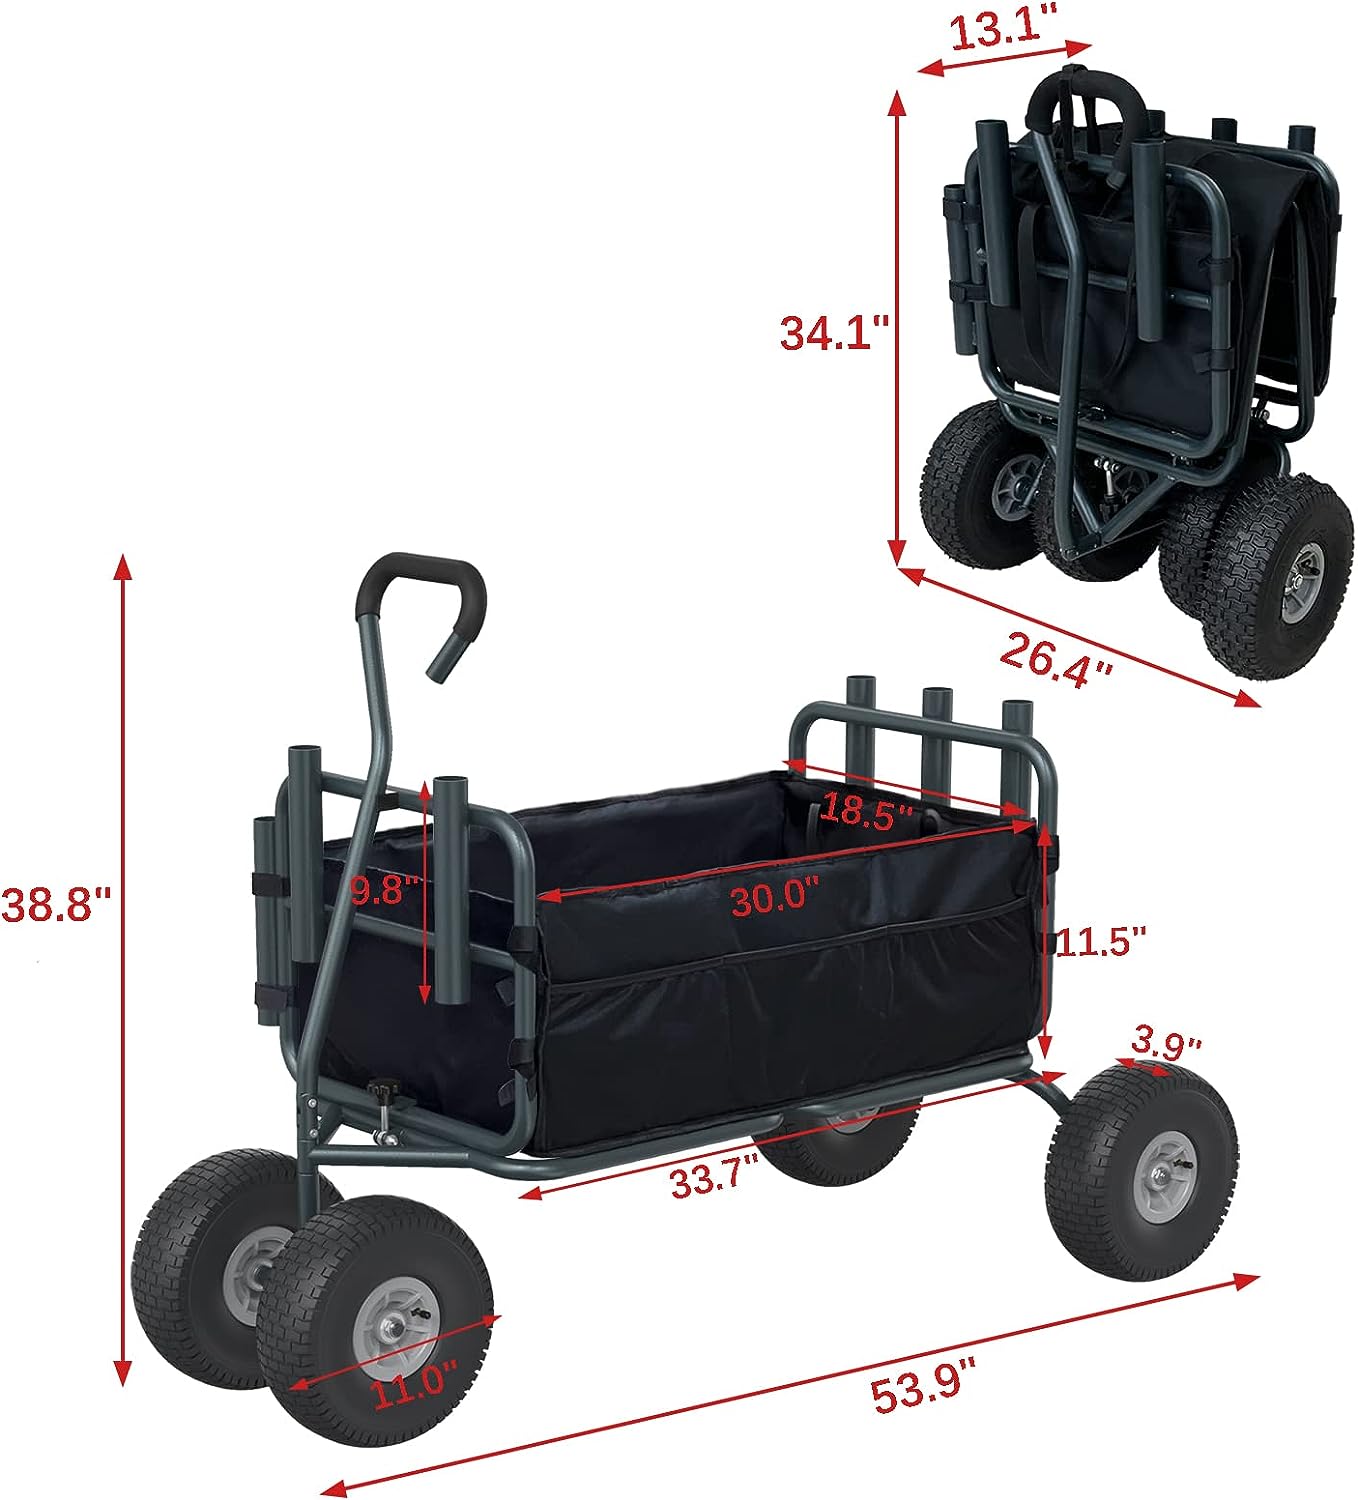 https://bigbigmart.com/wp-content/uploads/2023/09/GDLF-Fishing-Cart-Beach-Carts-Heavy-Duty-Foldable-Collapsible-Wagon-with-Big-Wheels-and-Rod-Holders-550-Pound-Capacity....jpg